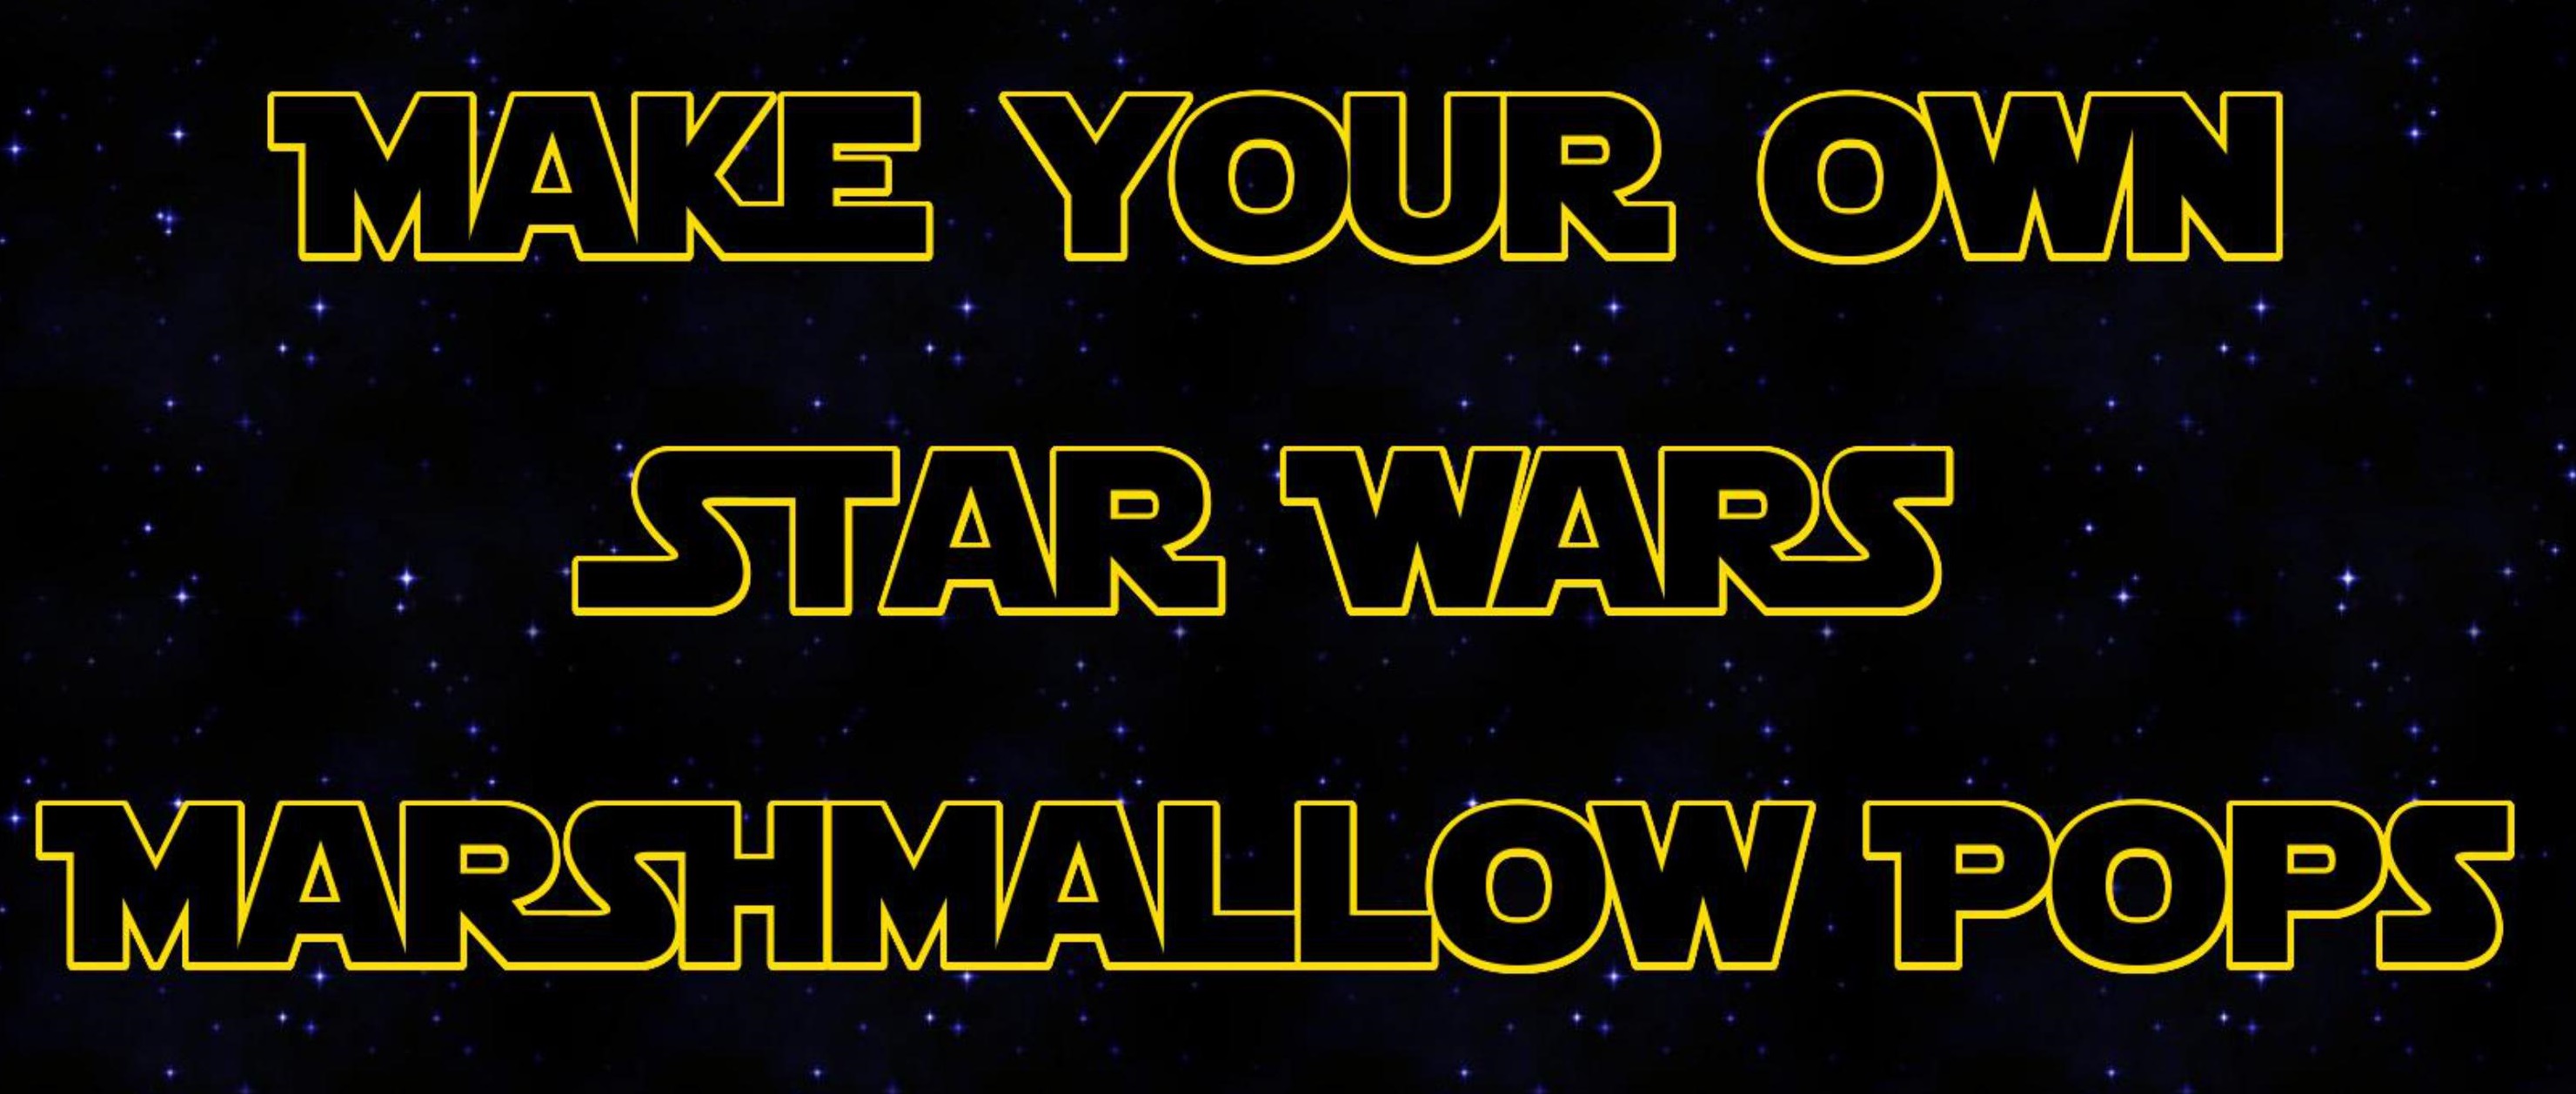 Image says "Make Your Own Star Wars Marshmallow Pops"